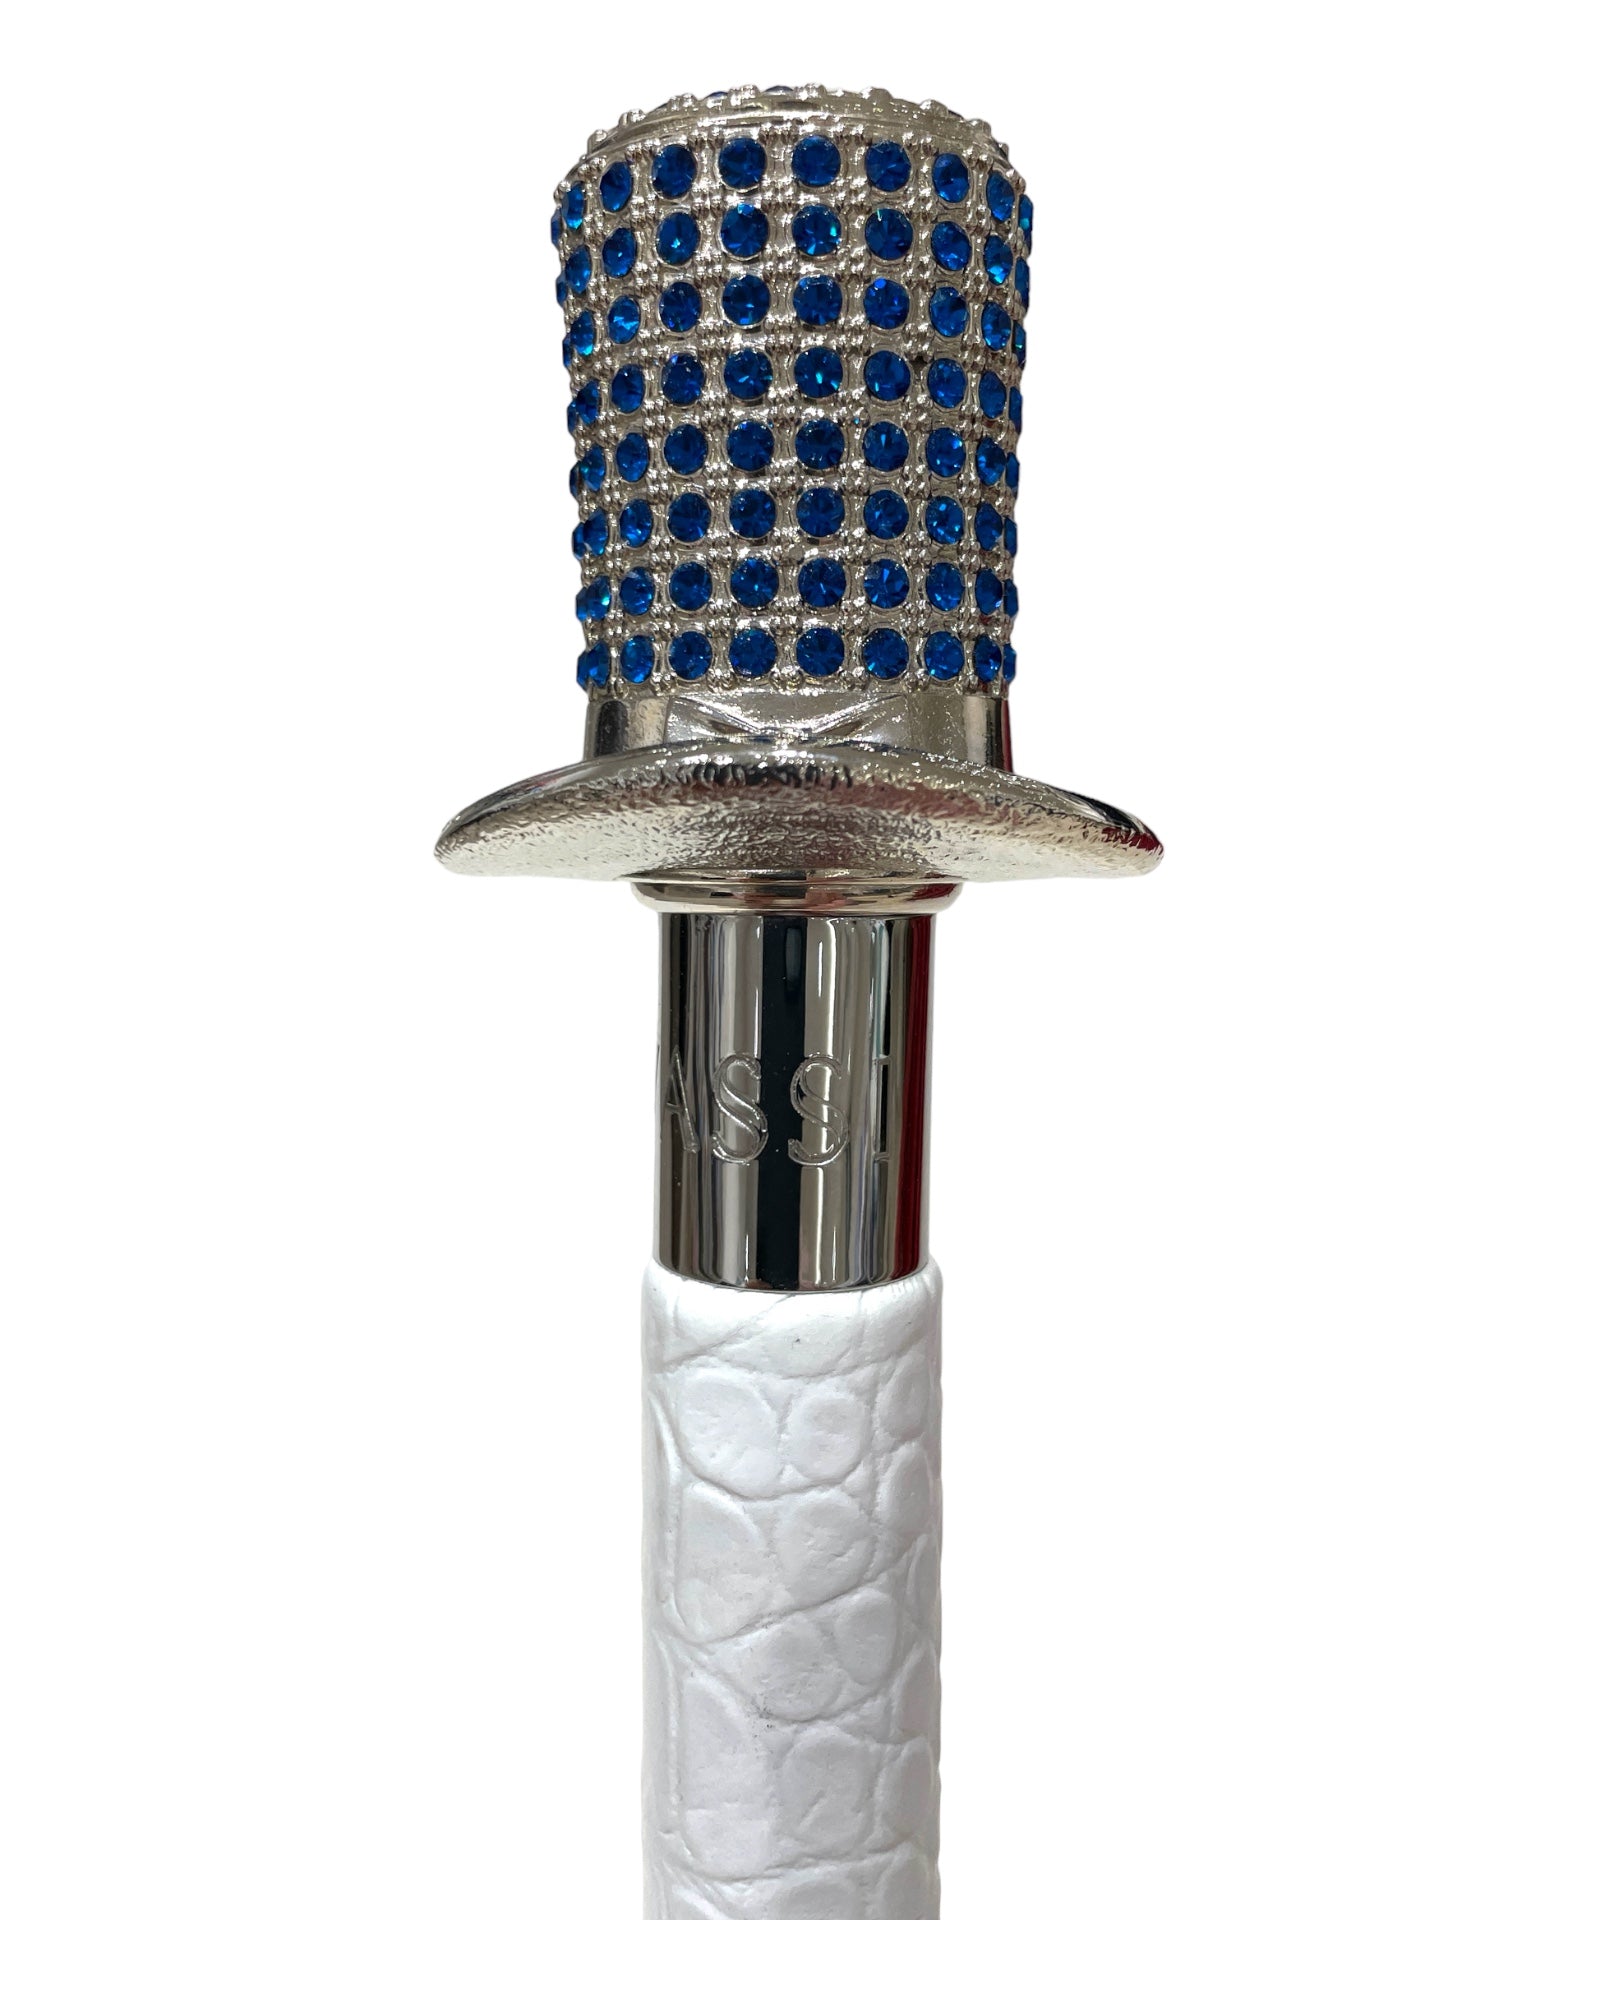 Blue Swarovski Crystals, Top Hat Long Shoehorn - White Leather SHOEHORN